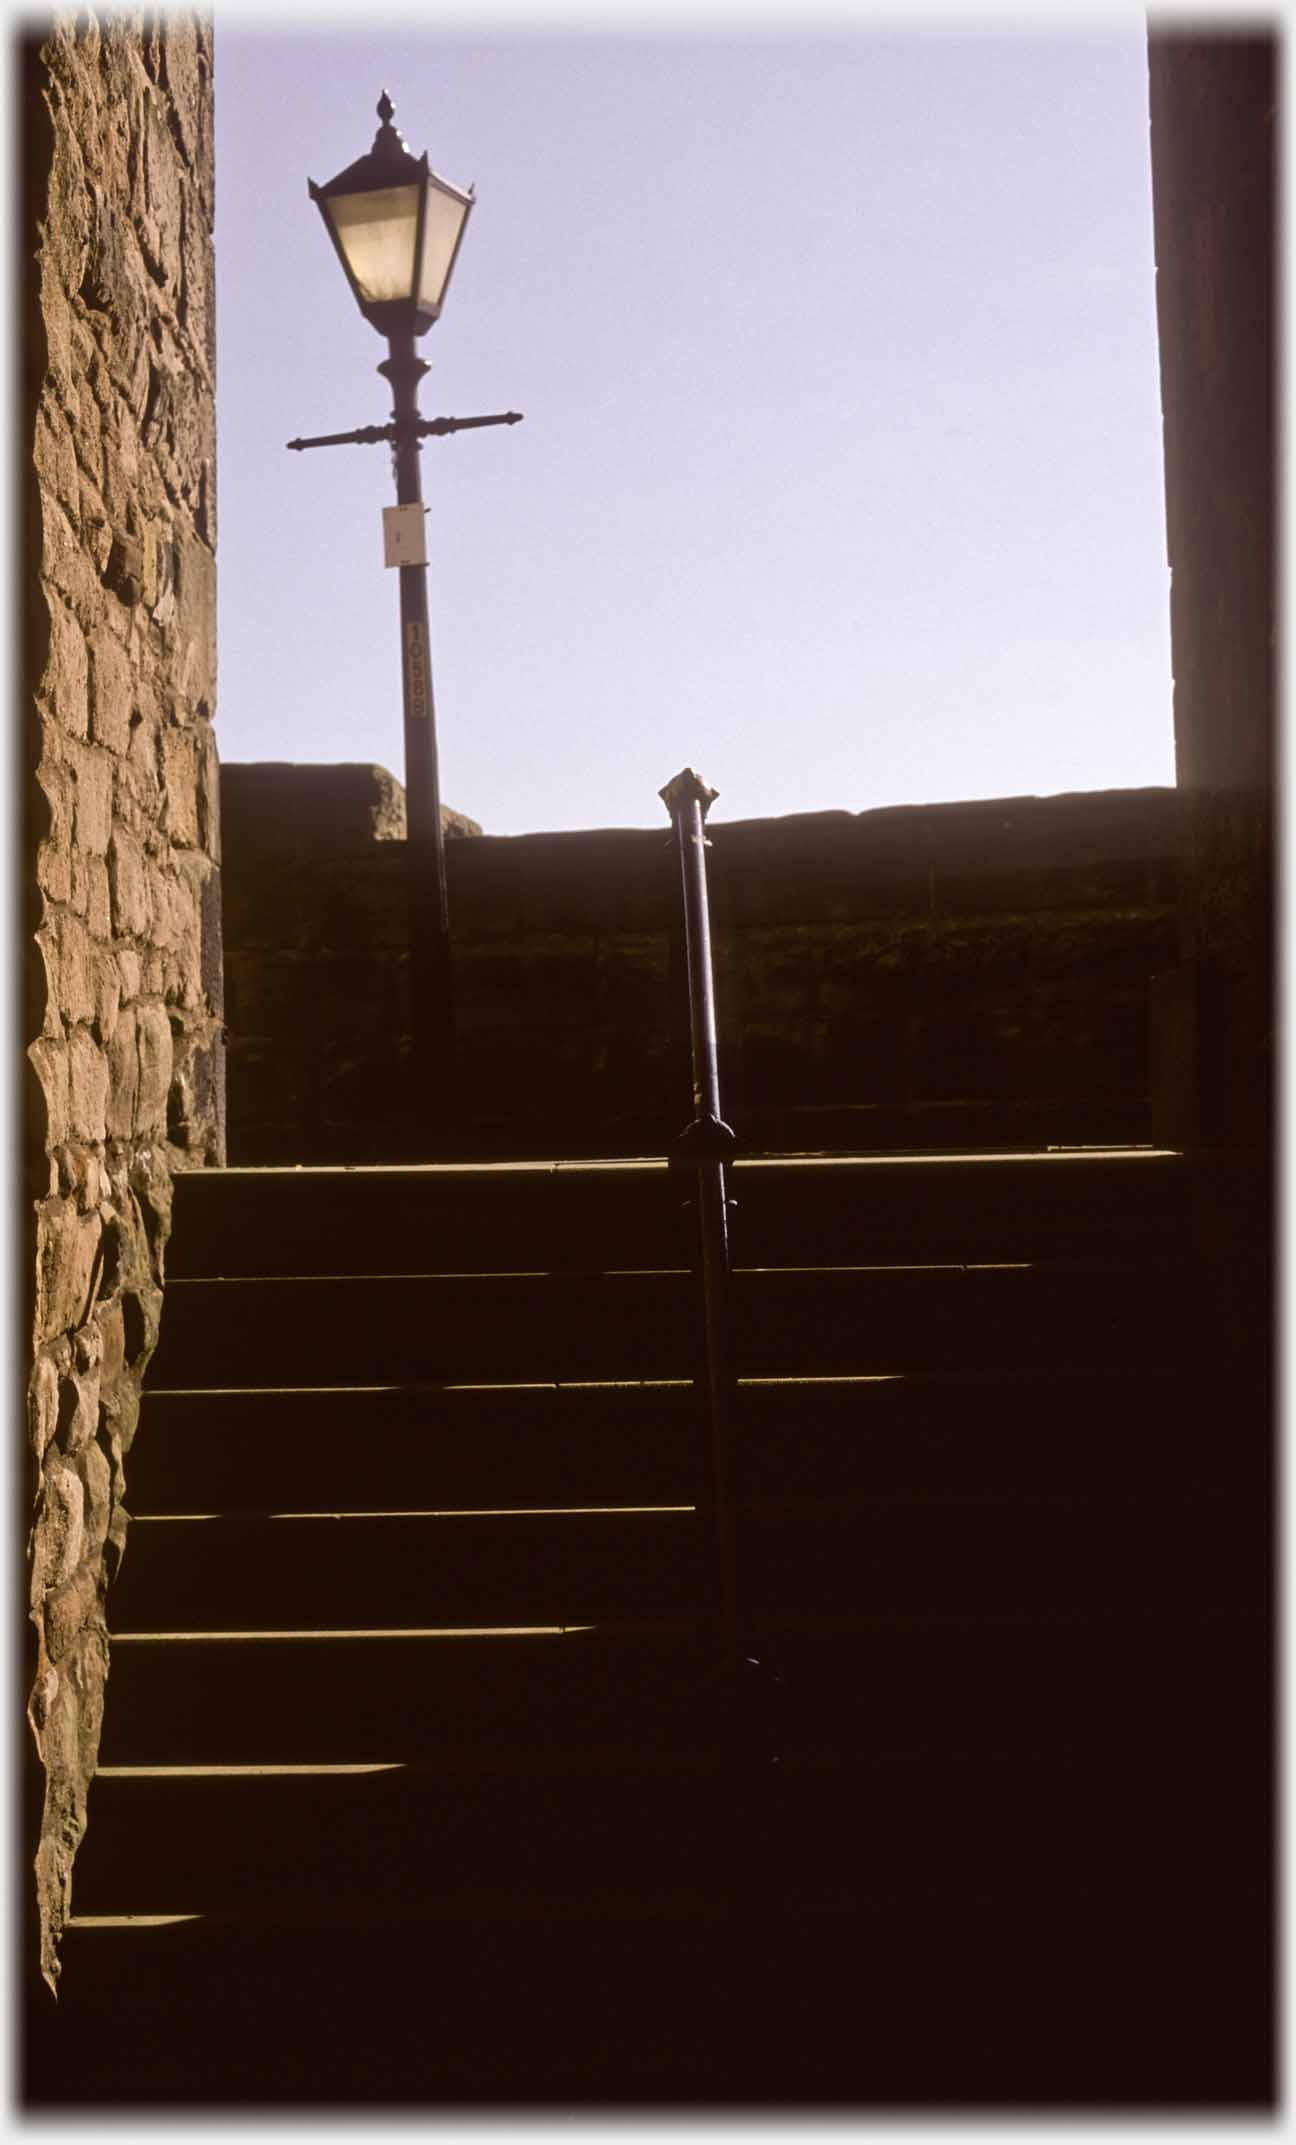 Light catching side of steps with post, parapit and lamppost.